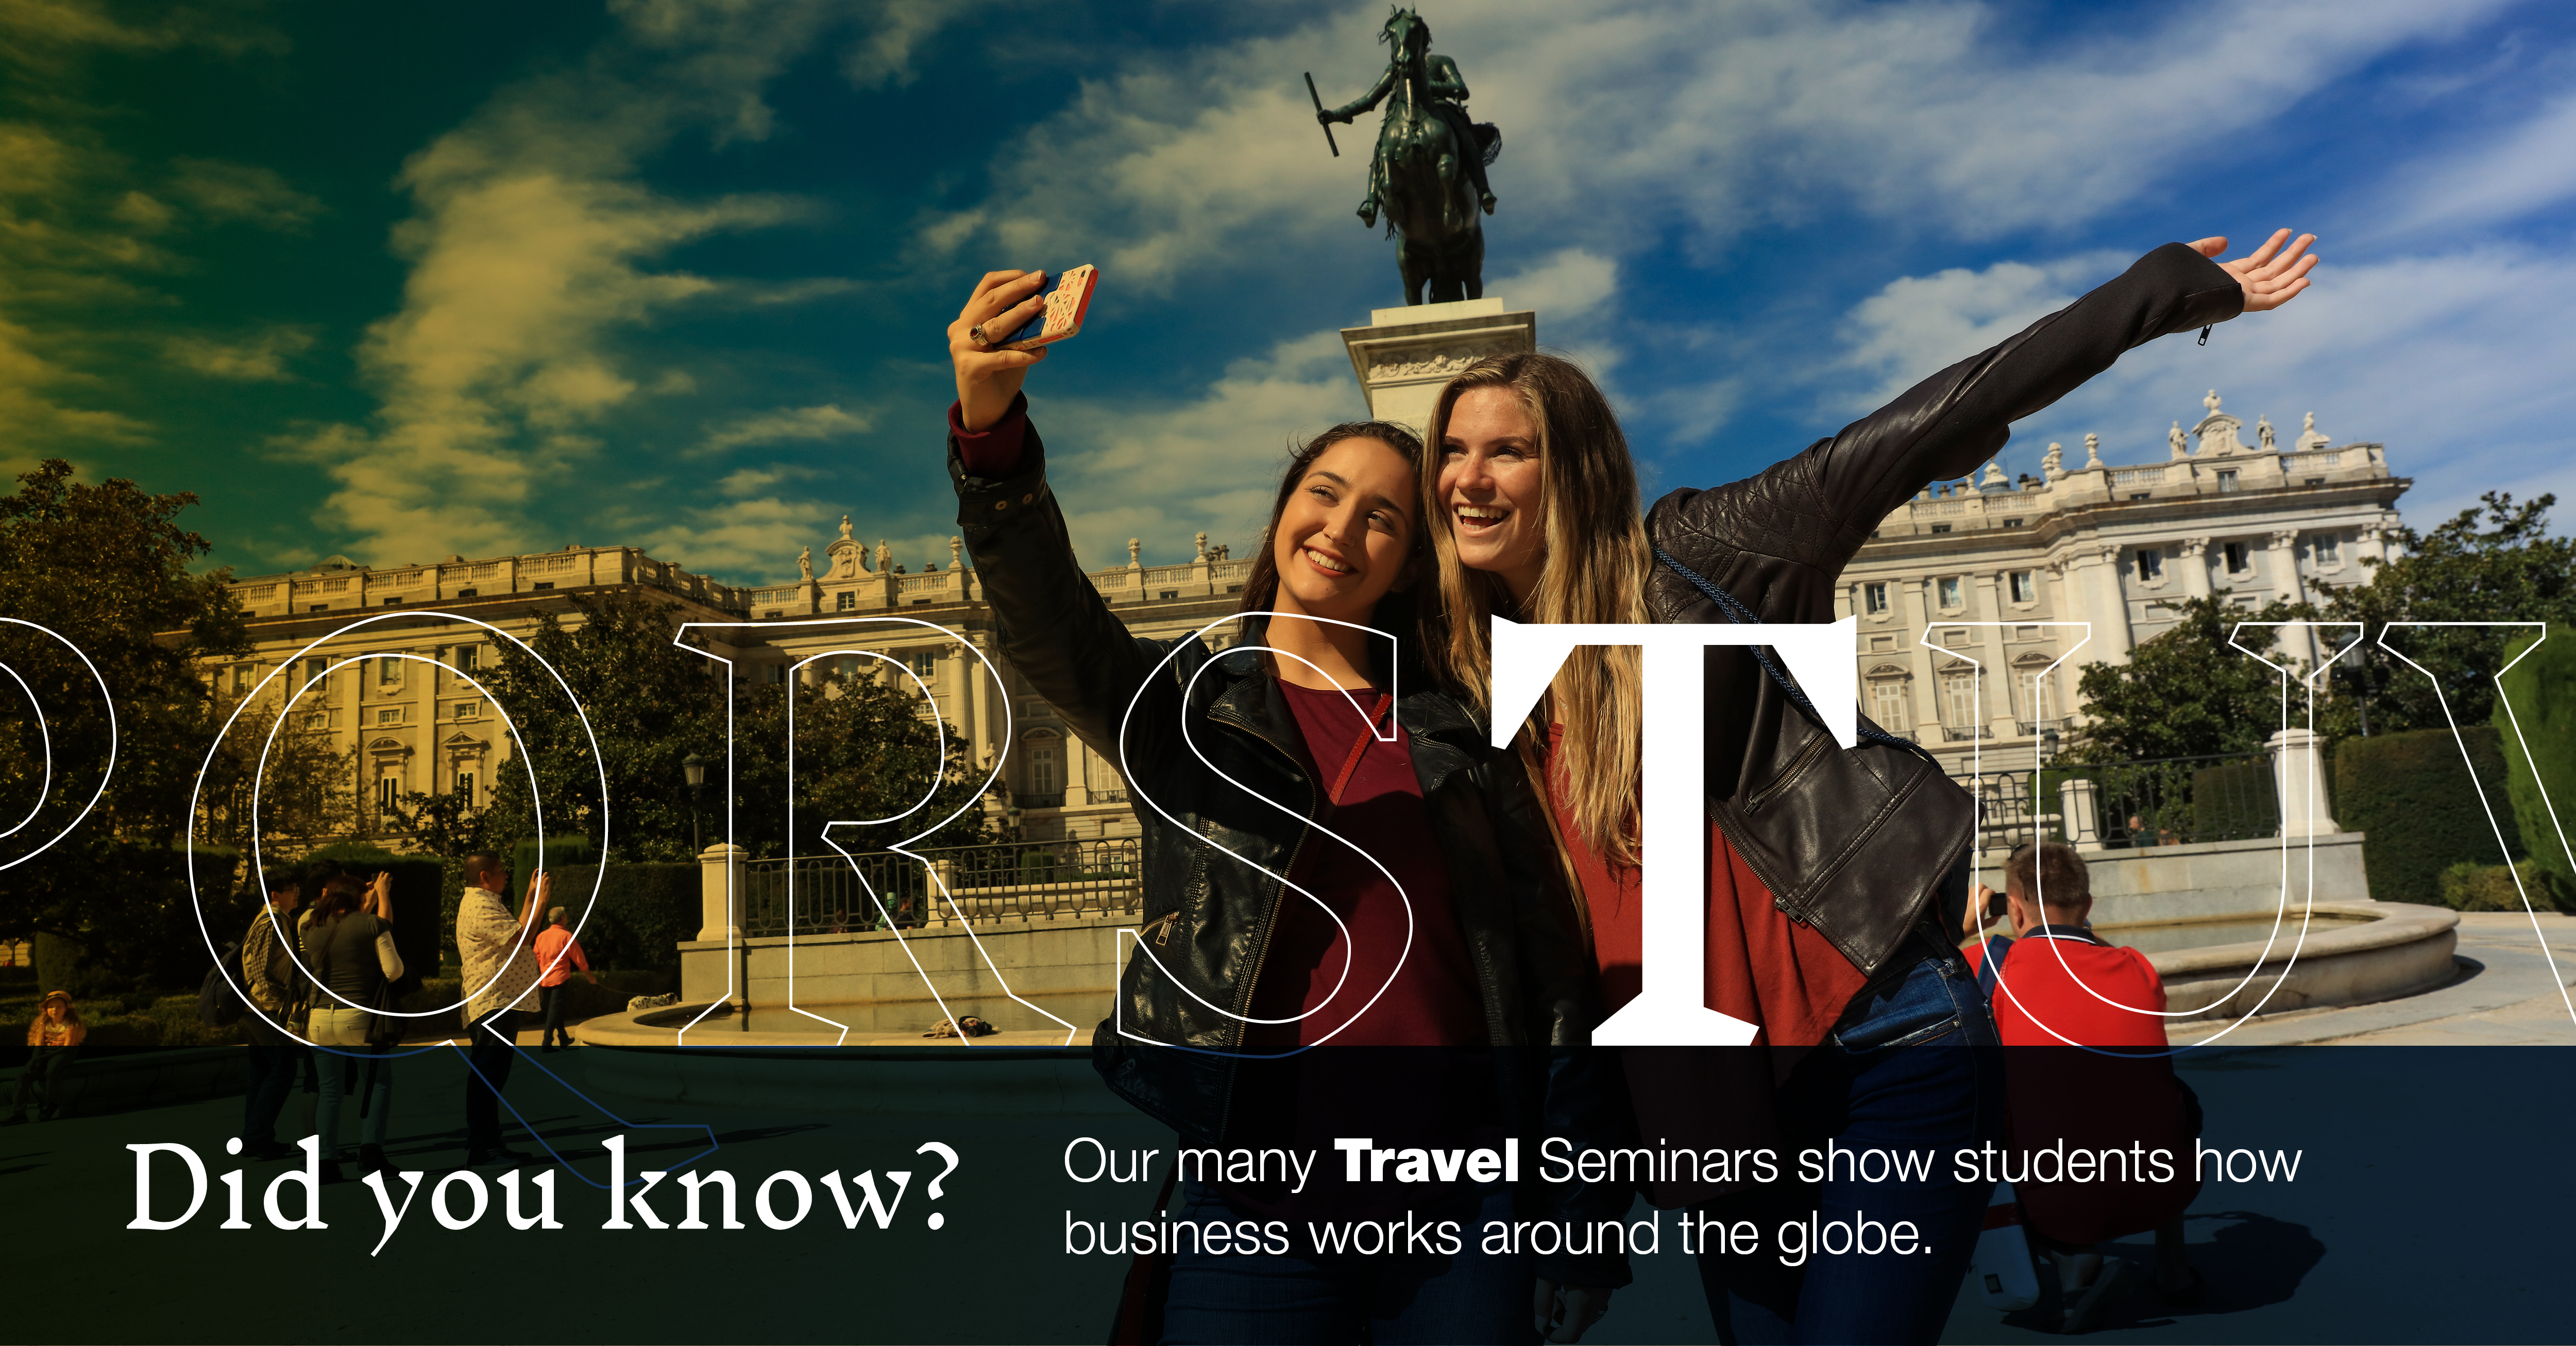 T: [image of students taking selfie in Madrid] Did you know our many Travel Seminars show students how business works around the globe?